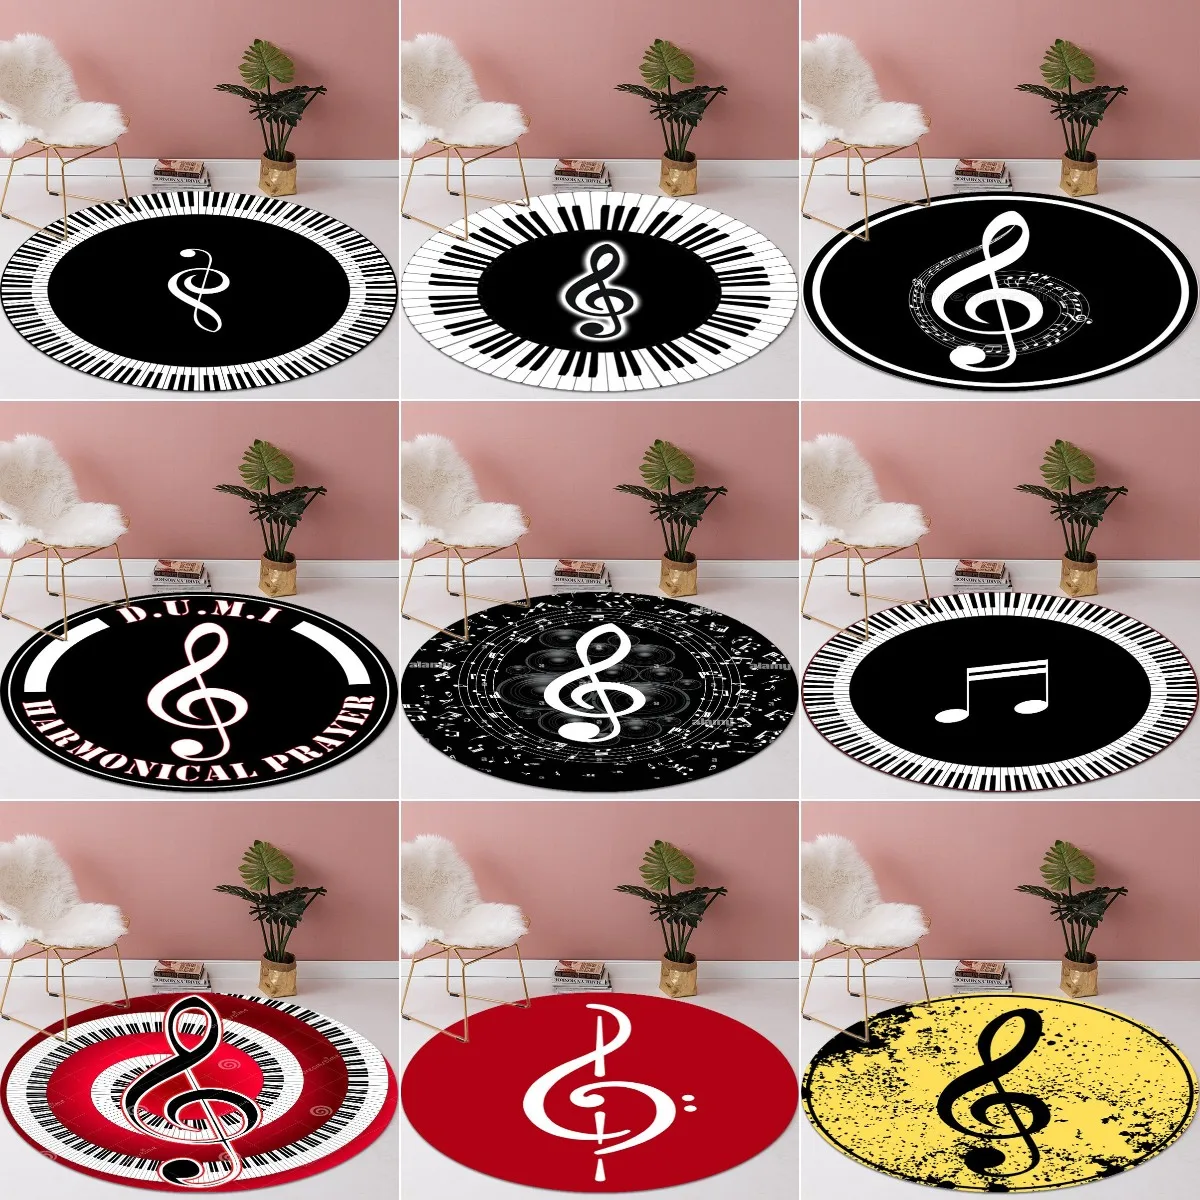 New Colorful Music Symbol Carpet Piano Keys Black White Round Rugs Non-slip Area Rug for Living Room Bedroom Foot Pad Decoration